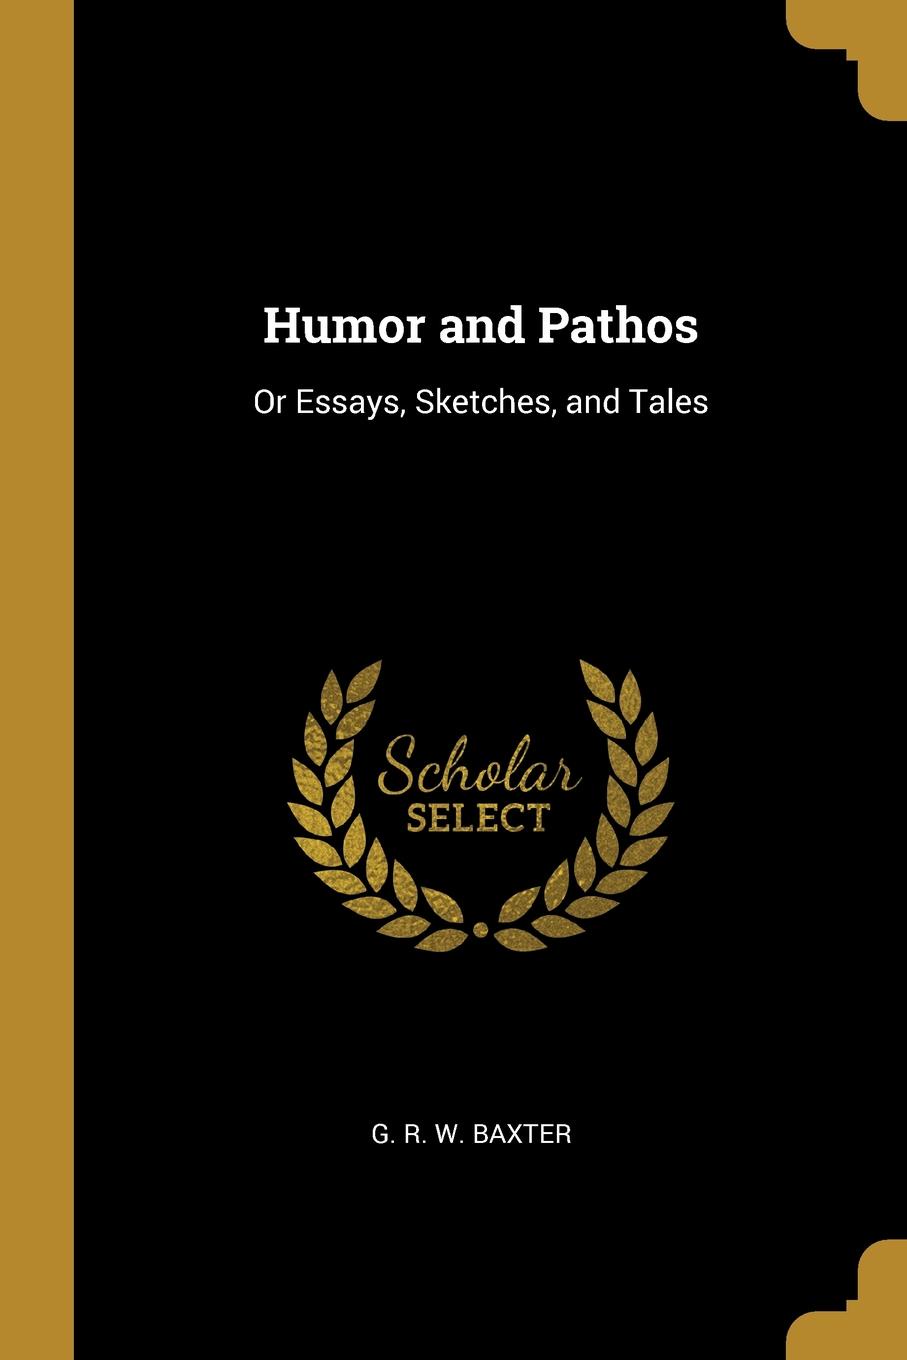 Humor and Pathos. Or Essays, Sketches, and Tales